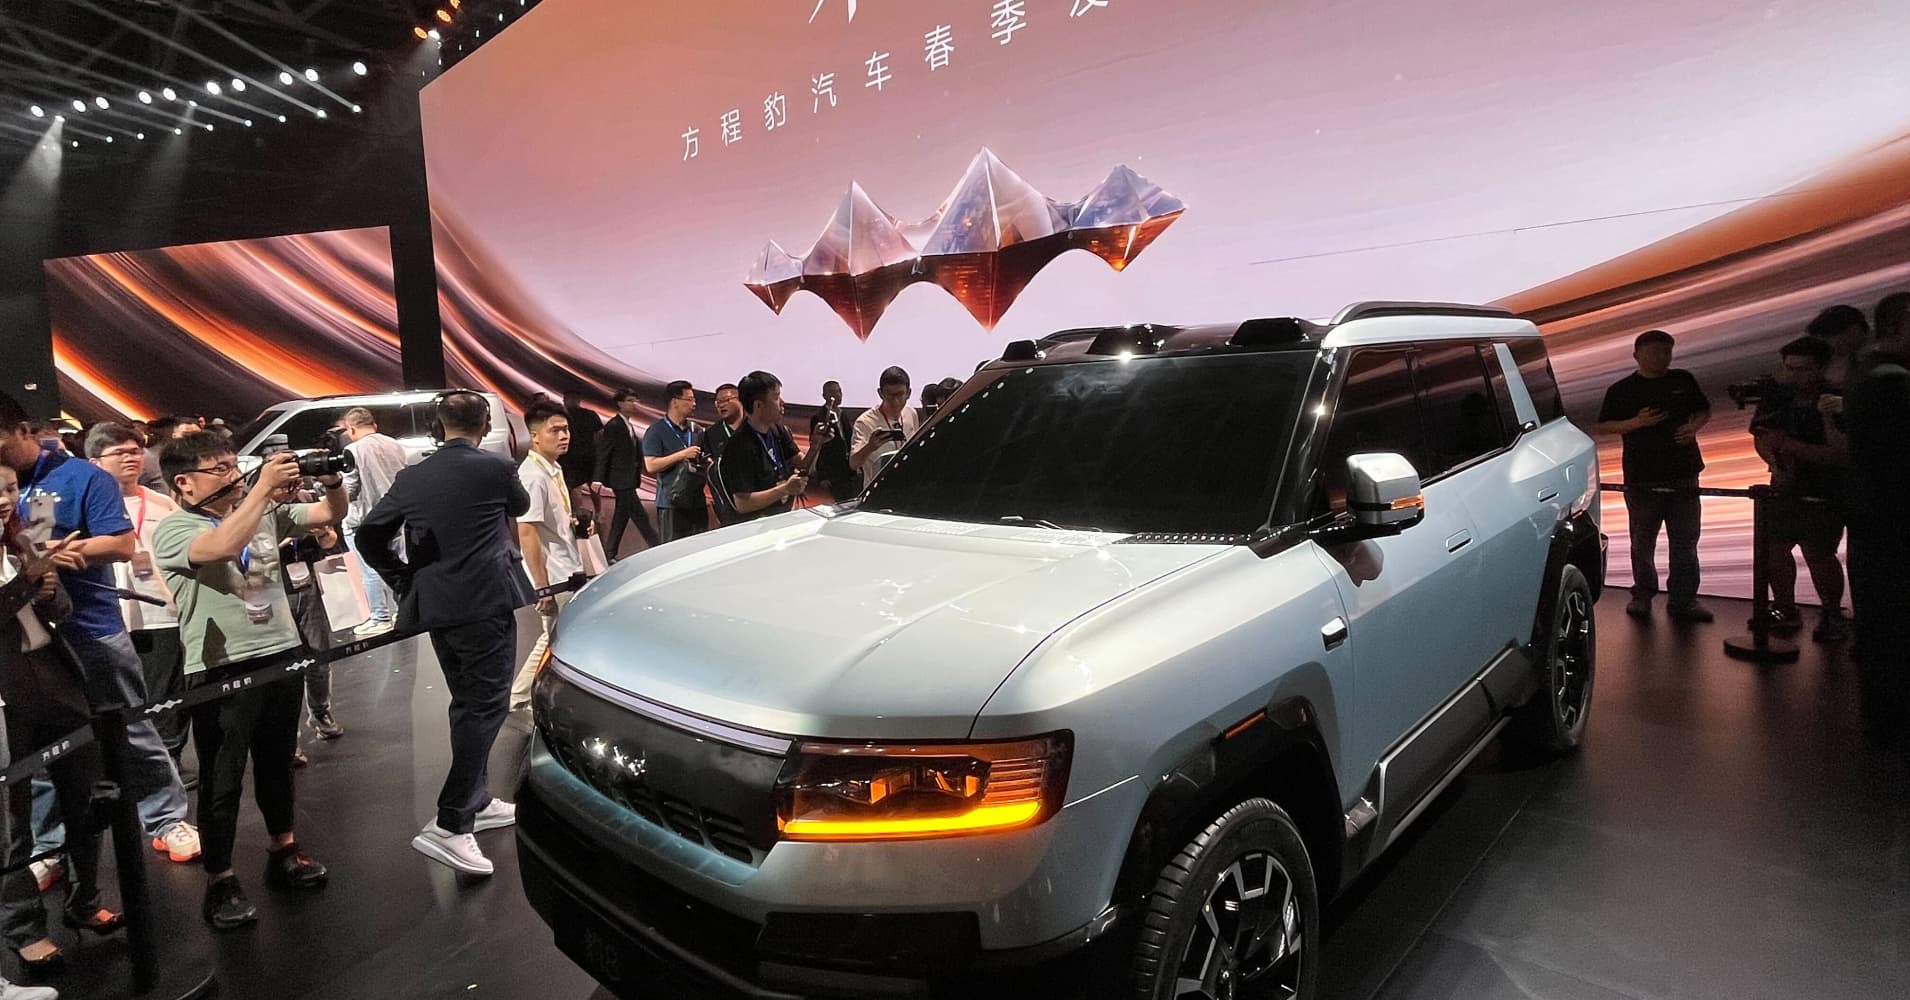 china's byd fires up its car offerings to compete with tesla and jeep at the same time